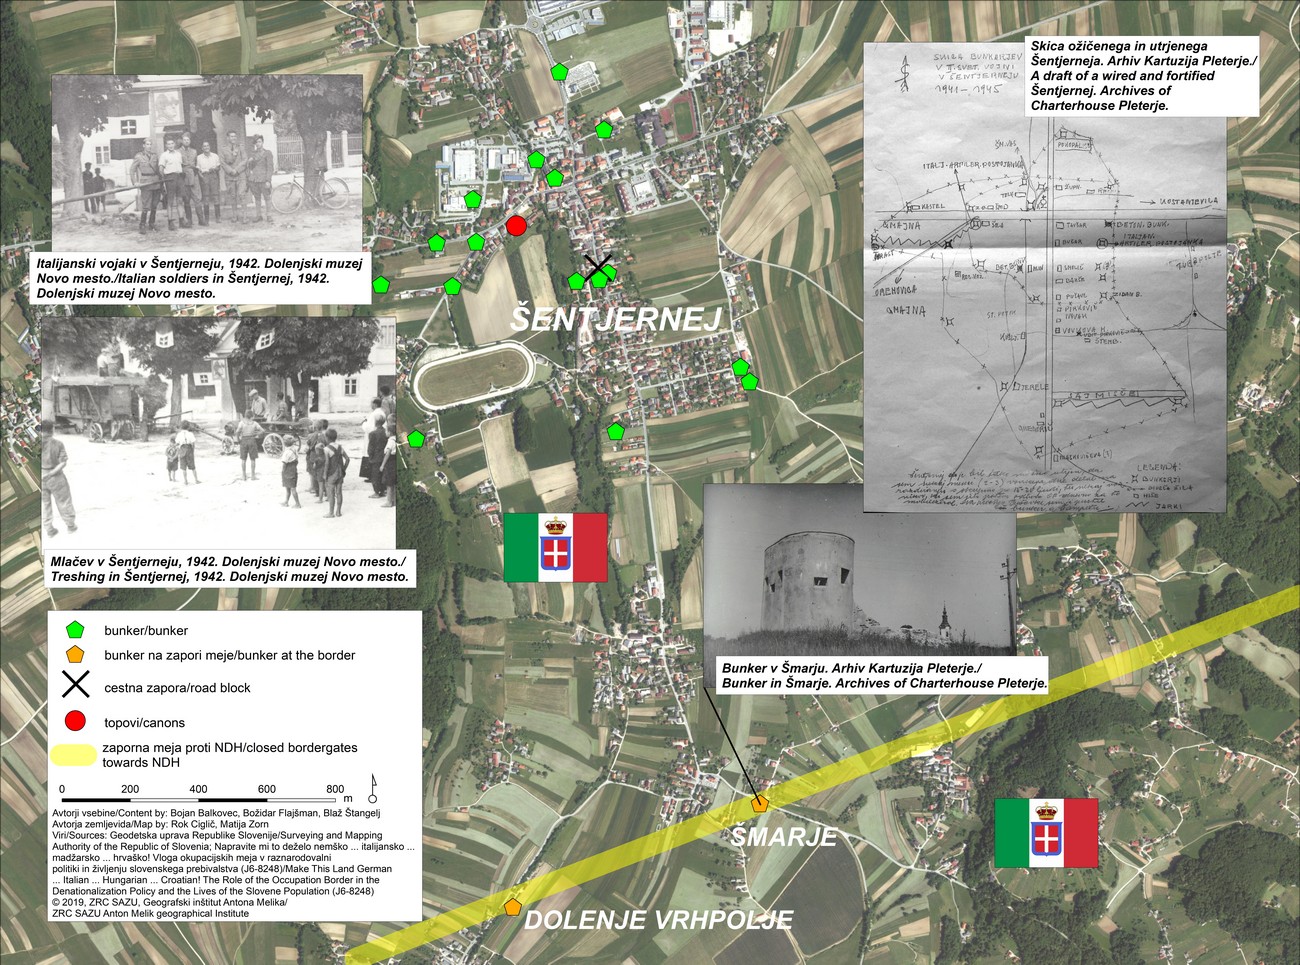 The Partisan sketch and the map clearly show how the Italian occupying forces fortified Šentjernej. It was enclosed by two rings of barbed wire and bunkers. The first ring surrounded the centre of the town, while the other ran along its outskirts. In the centre of town, they also had an artillery battery with which they fired on the Partisan positions in the Gorjanci Hills. The town was decorated with Italian flags and portraits of Mussolini, which is visible in the photograph entitled »Threshing Day«. The Italian defensive line towards the Gorjanci Hills ran near Šentjernej; it, too, was made up of bunkers and barbed wire, and protected with firing trenches. Preserved in the photograph is the Italian bunker in Šmarje, which was photographed by monk Hugo Rožnik soon after the war; the photograph is kept by the monastery in Pleterje. There was a residential area to the right of the bunker, but it had been demolished before the photograph was taken. According to Janez Kuhelj, one of the townspeople built a house from the remains of the demolished bunker.